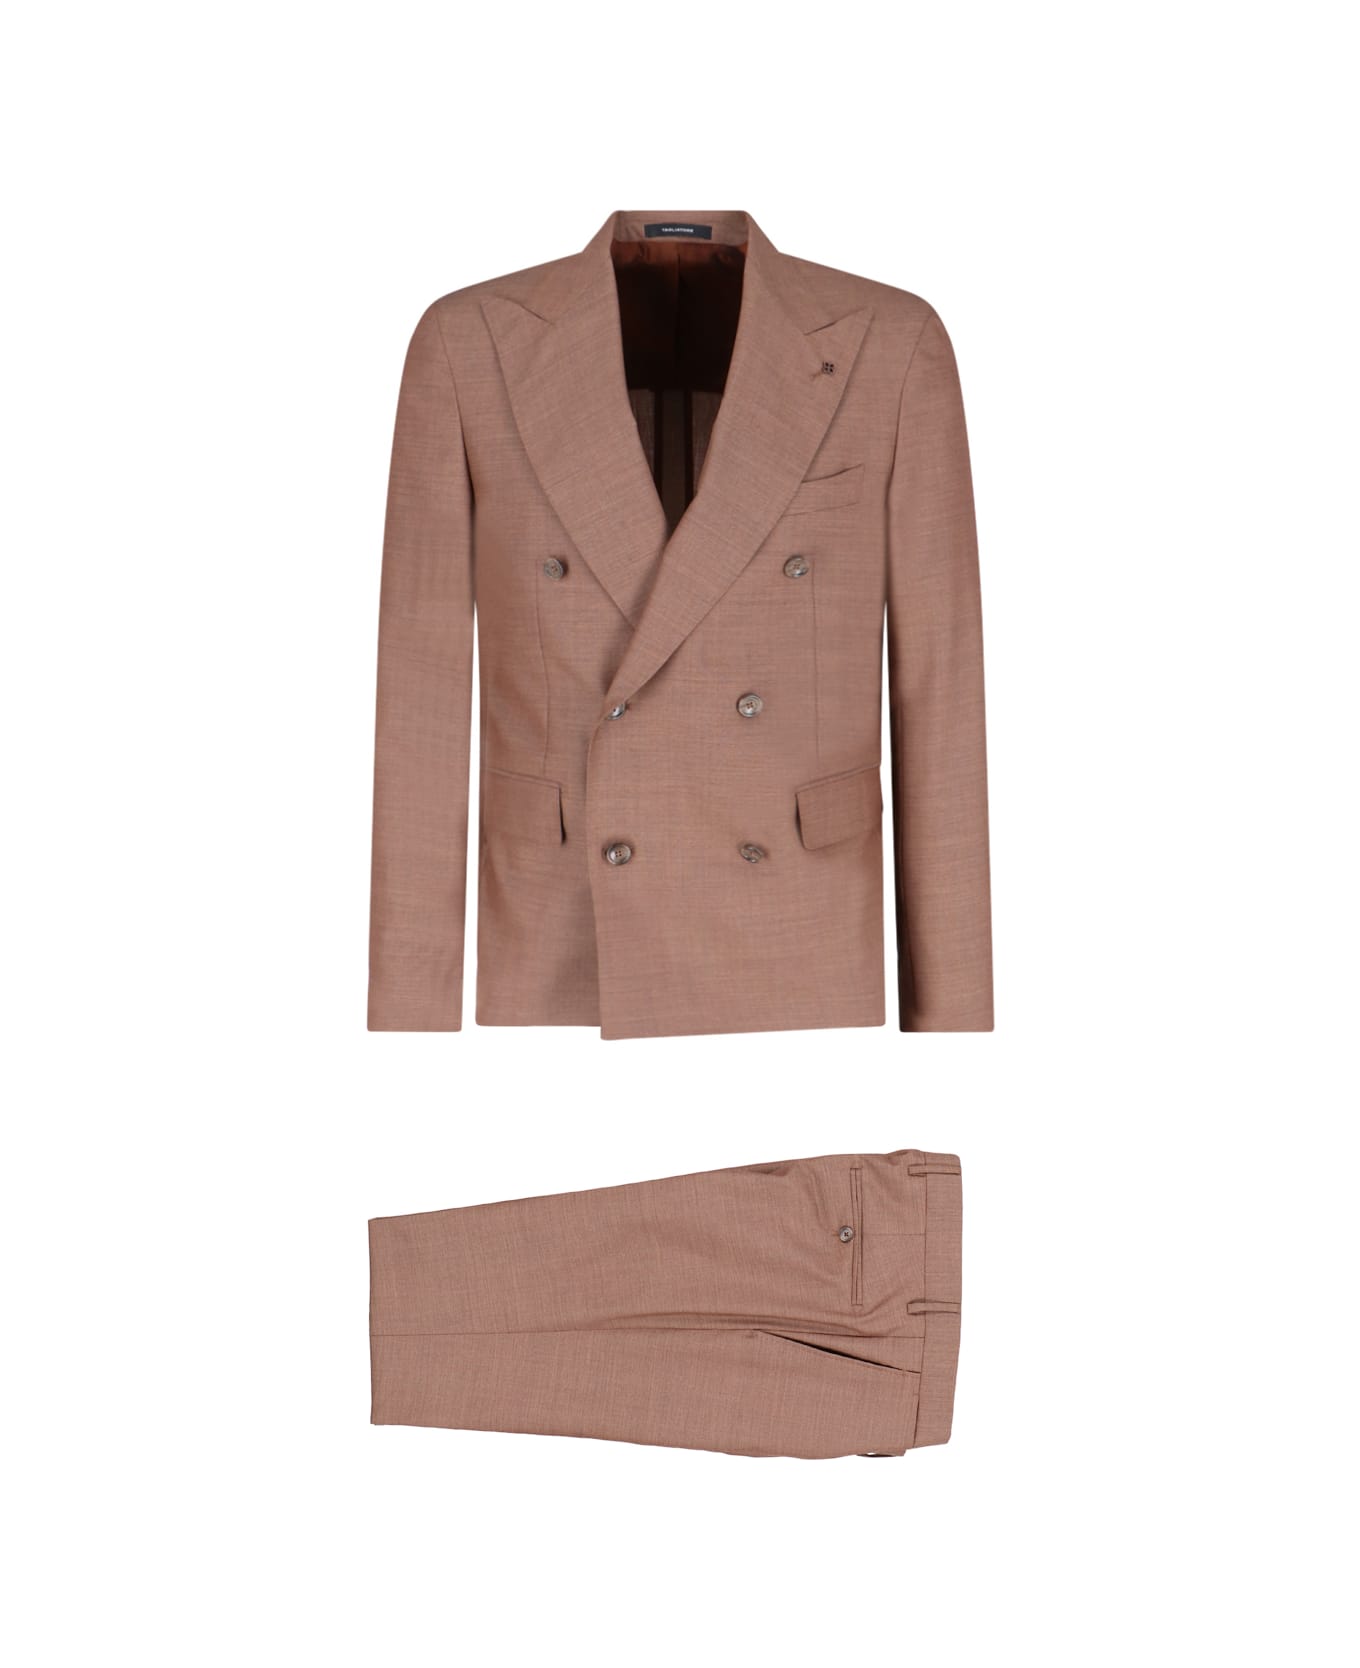 Tagliatore Double-breasted Suit - Brown スーツ